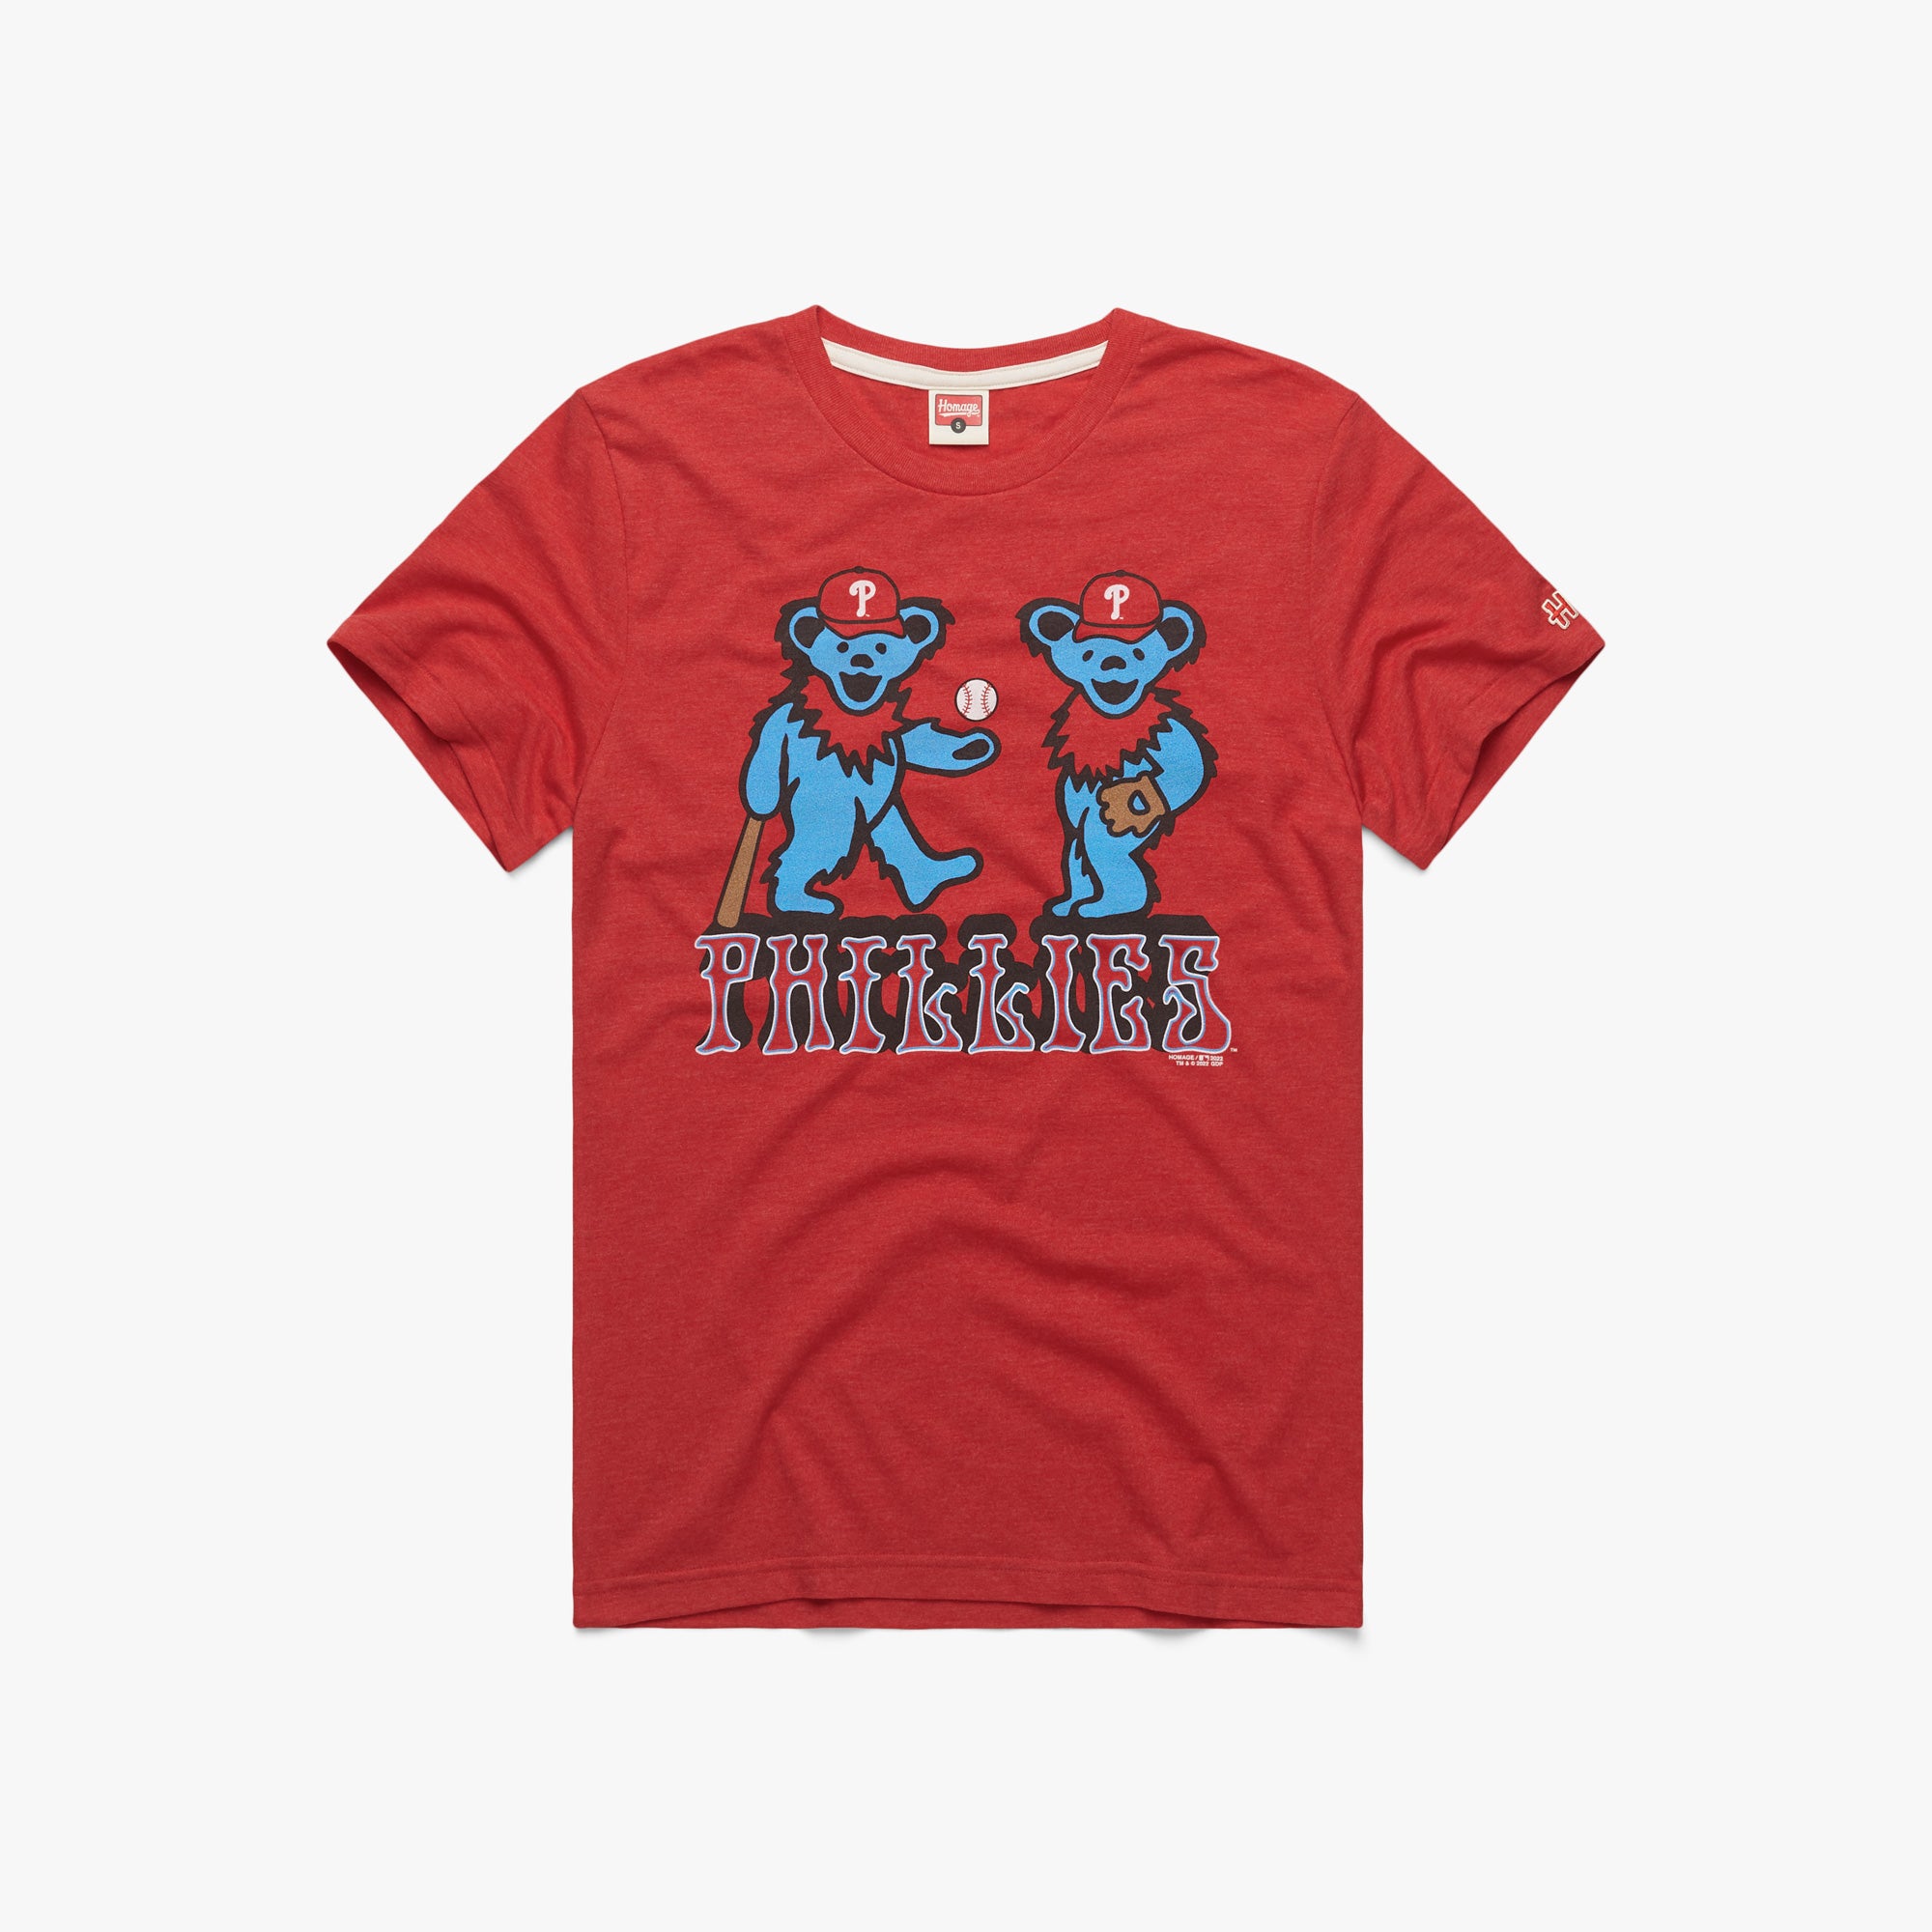 MLB x Grateful Dead x Phillies T-Shirt from Homage. | Red | Vintage Apparel from Homage.